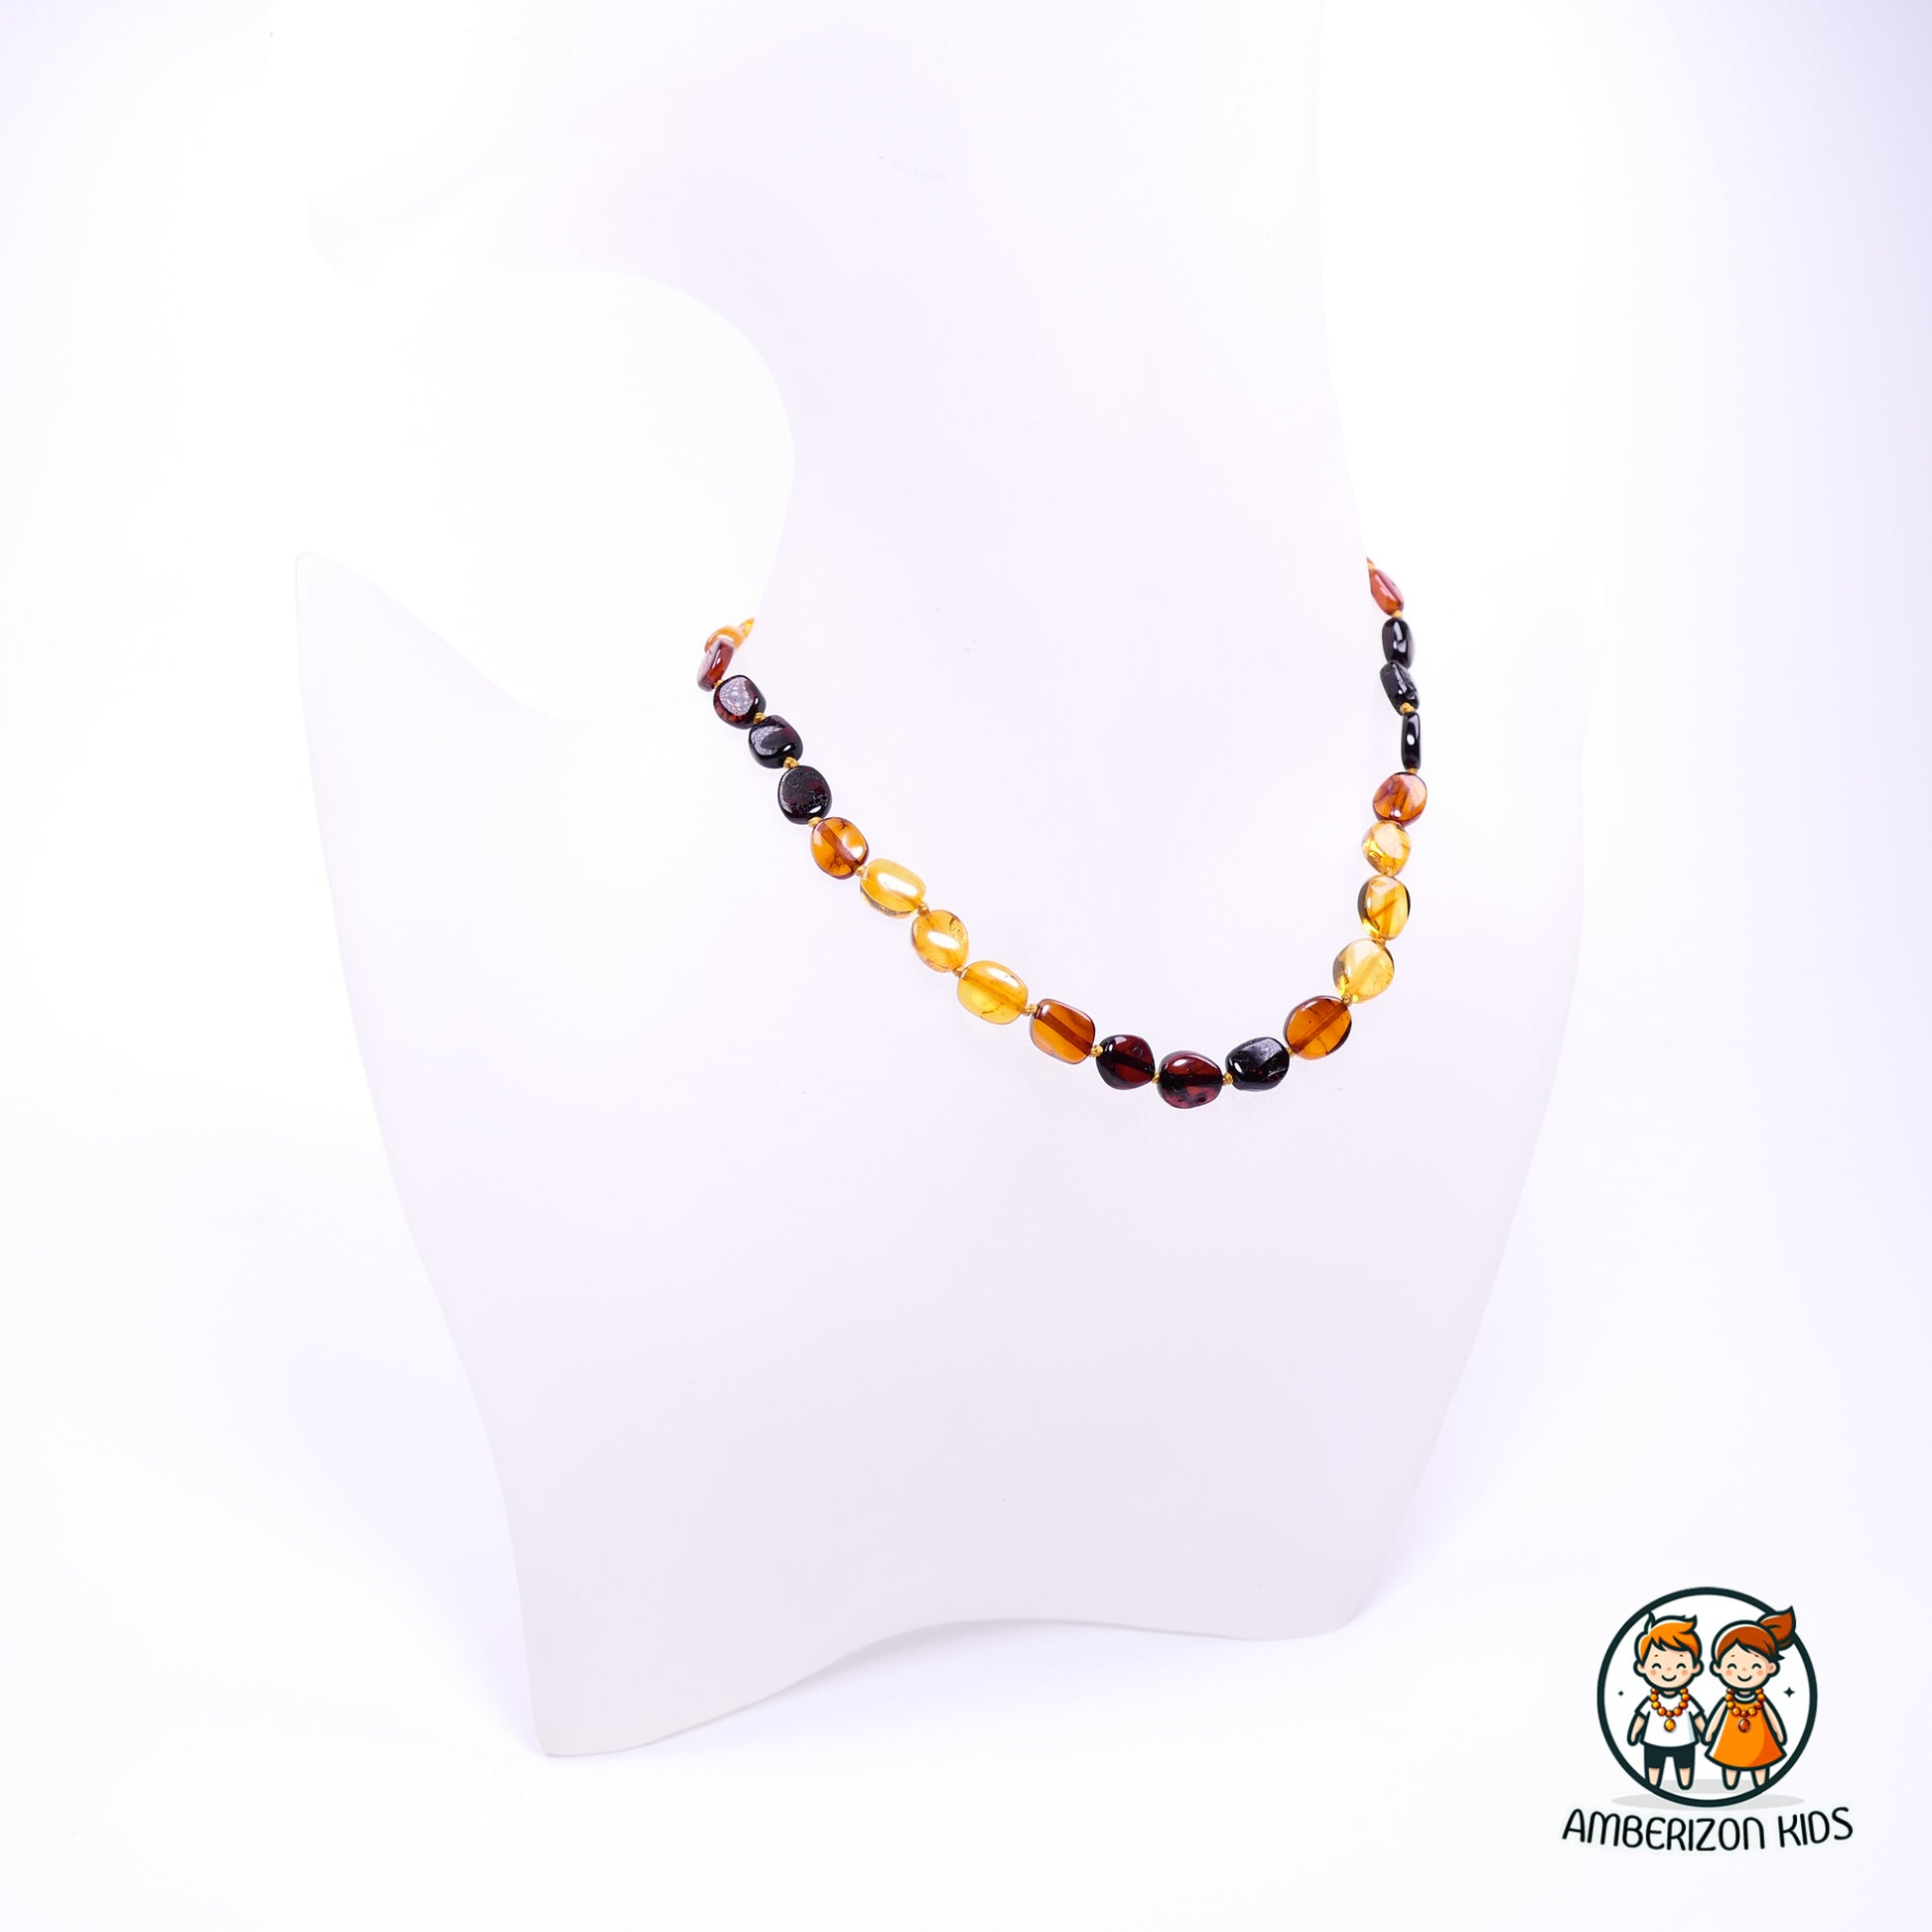 Versatile for Boys and Girls - Adorned with Polished Multicolored Amber Beads